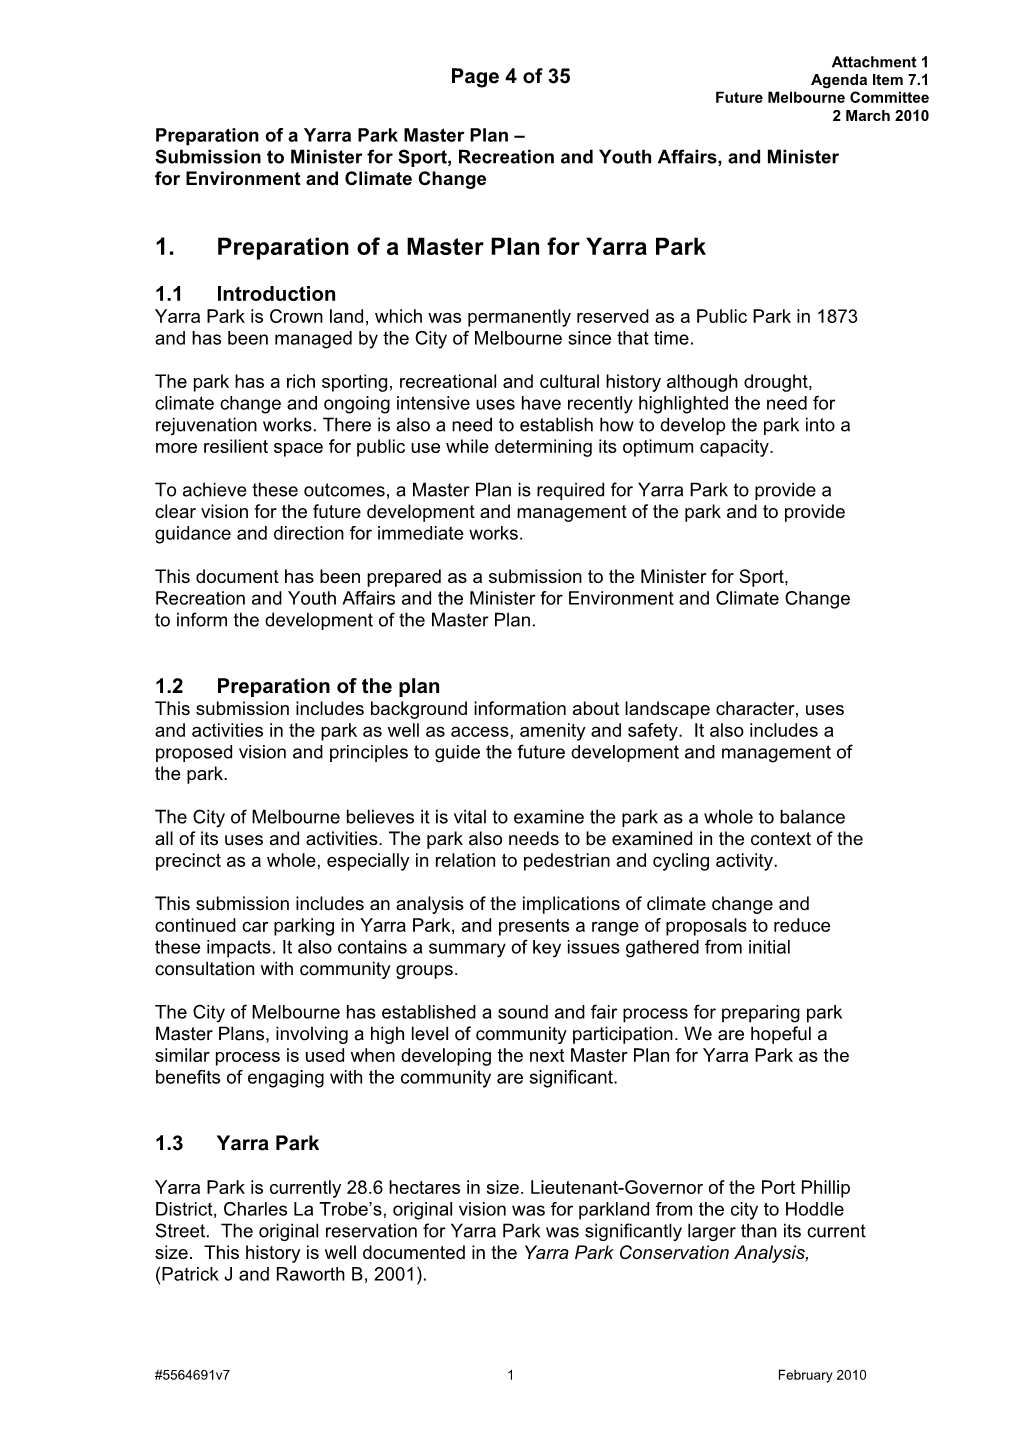 Submission on the Preparation of a Master Plan for Yarra Park